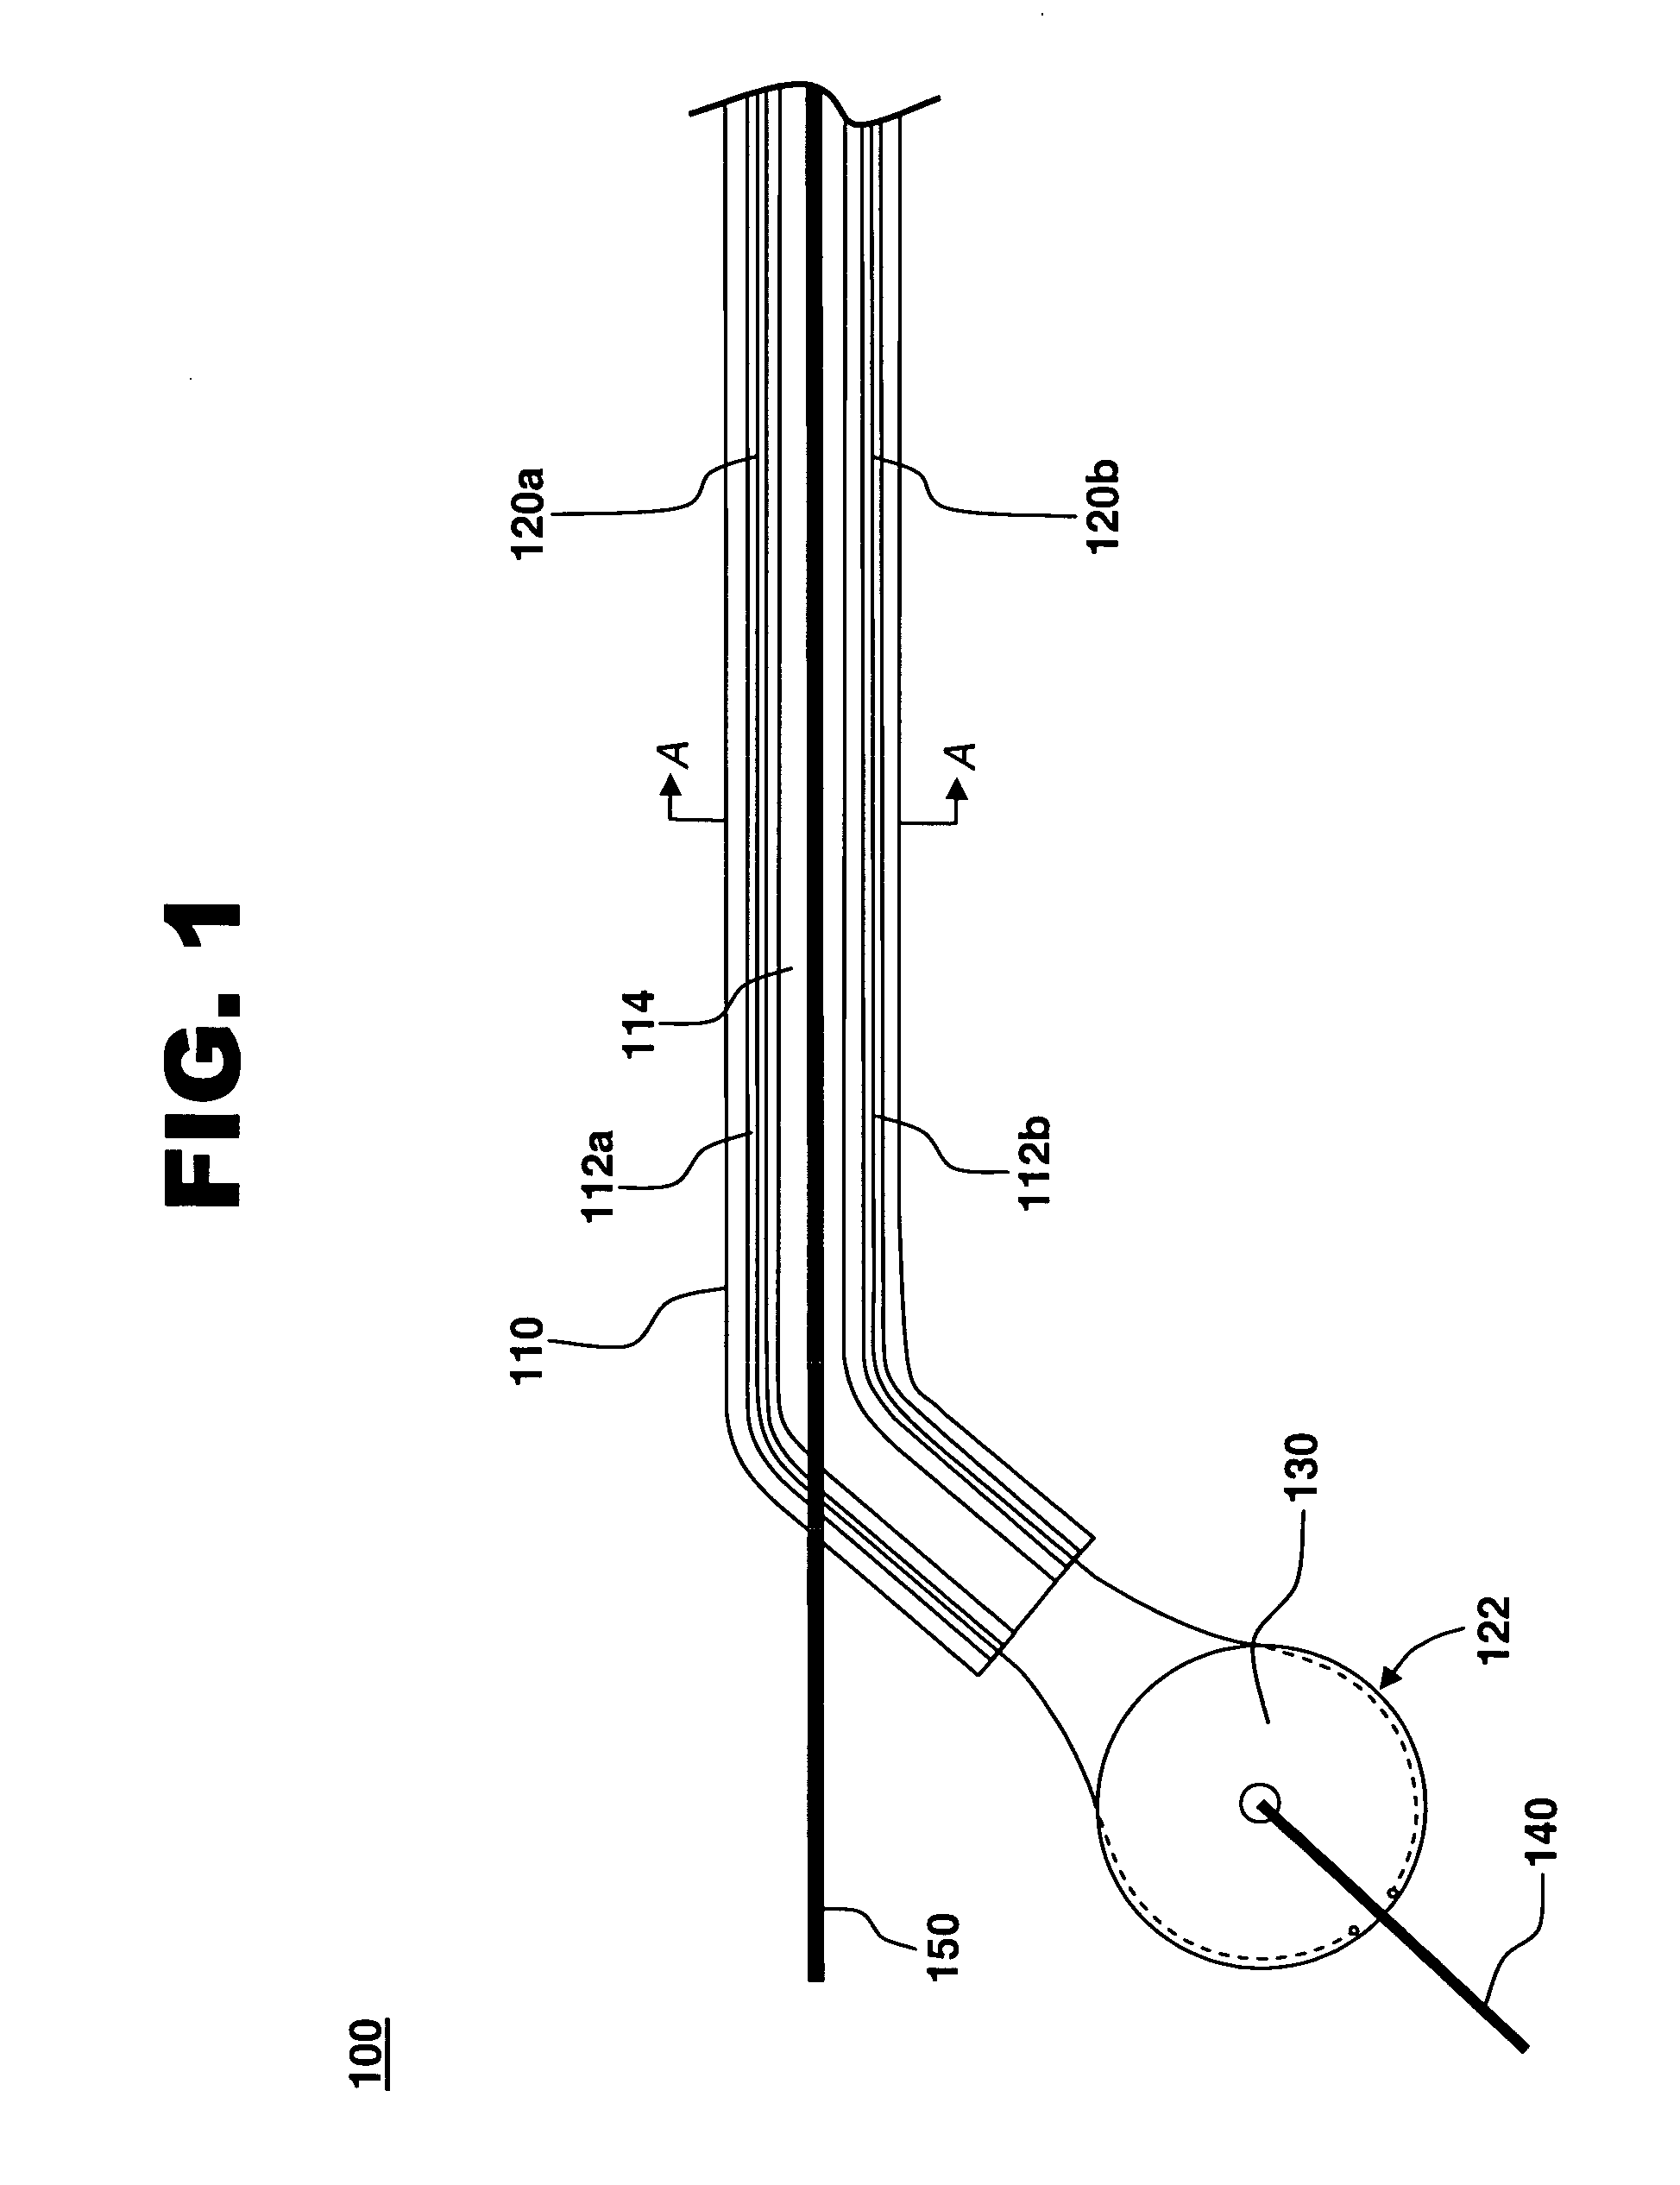 Stent delivery system with multiple evenly spaced pullwires